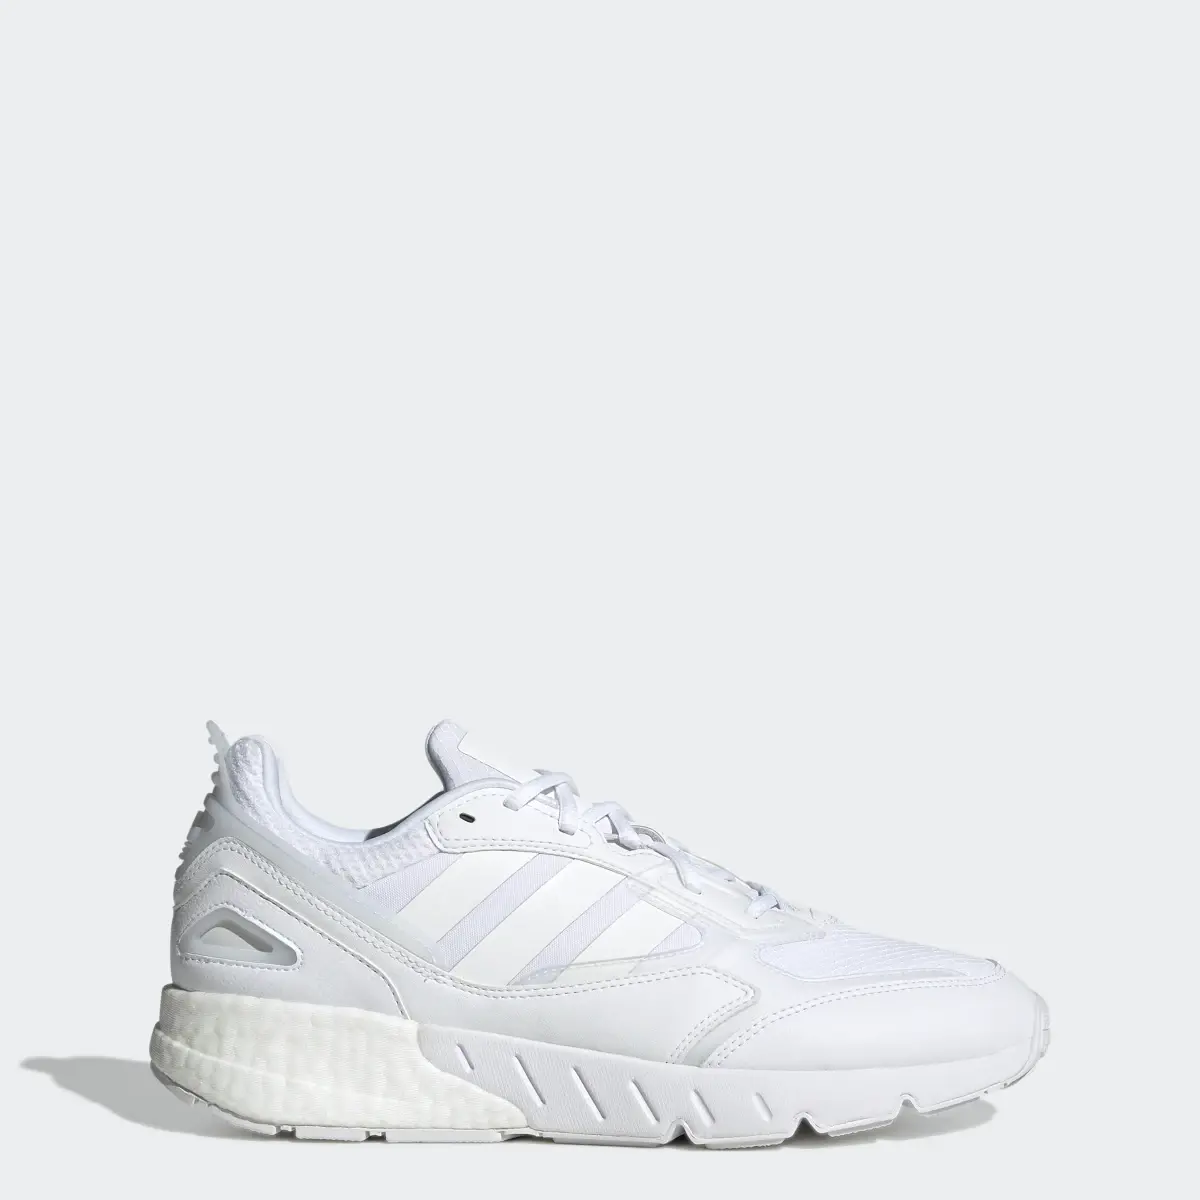 Adidas ZX 1K Boost 2.0 Shoes. 1